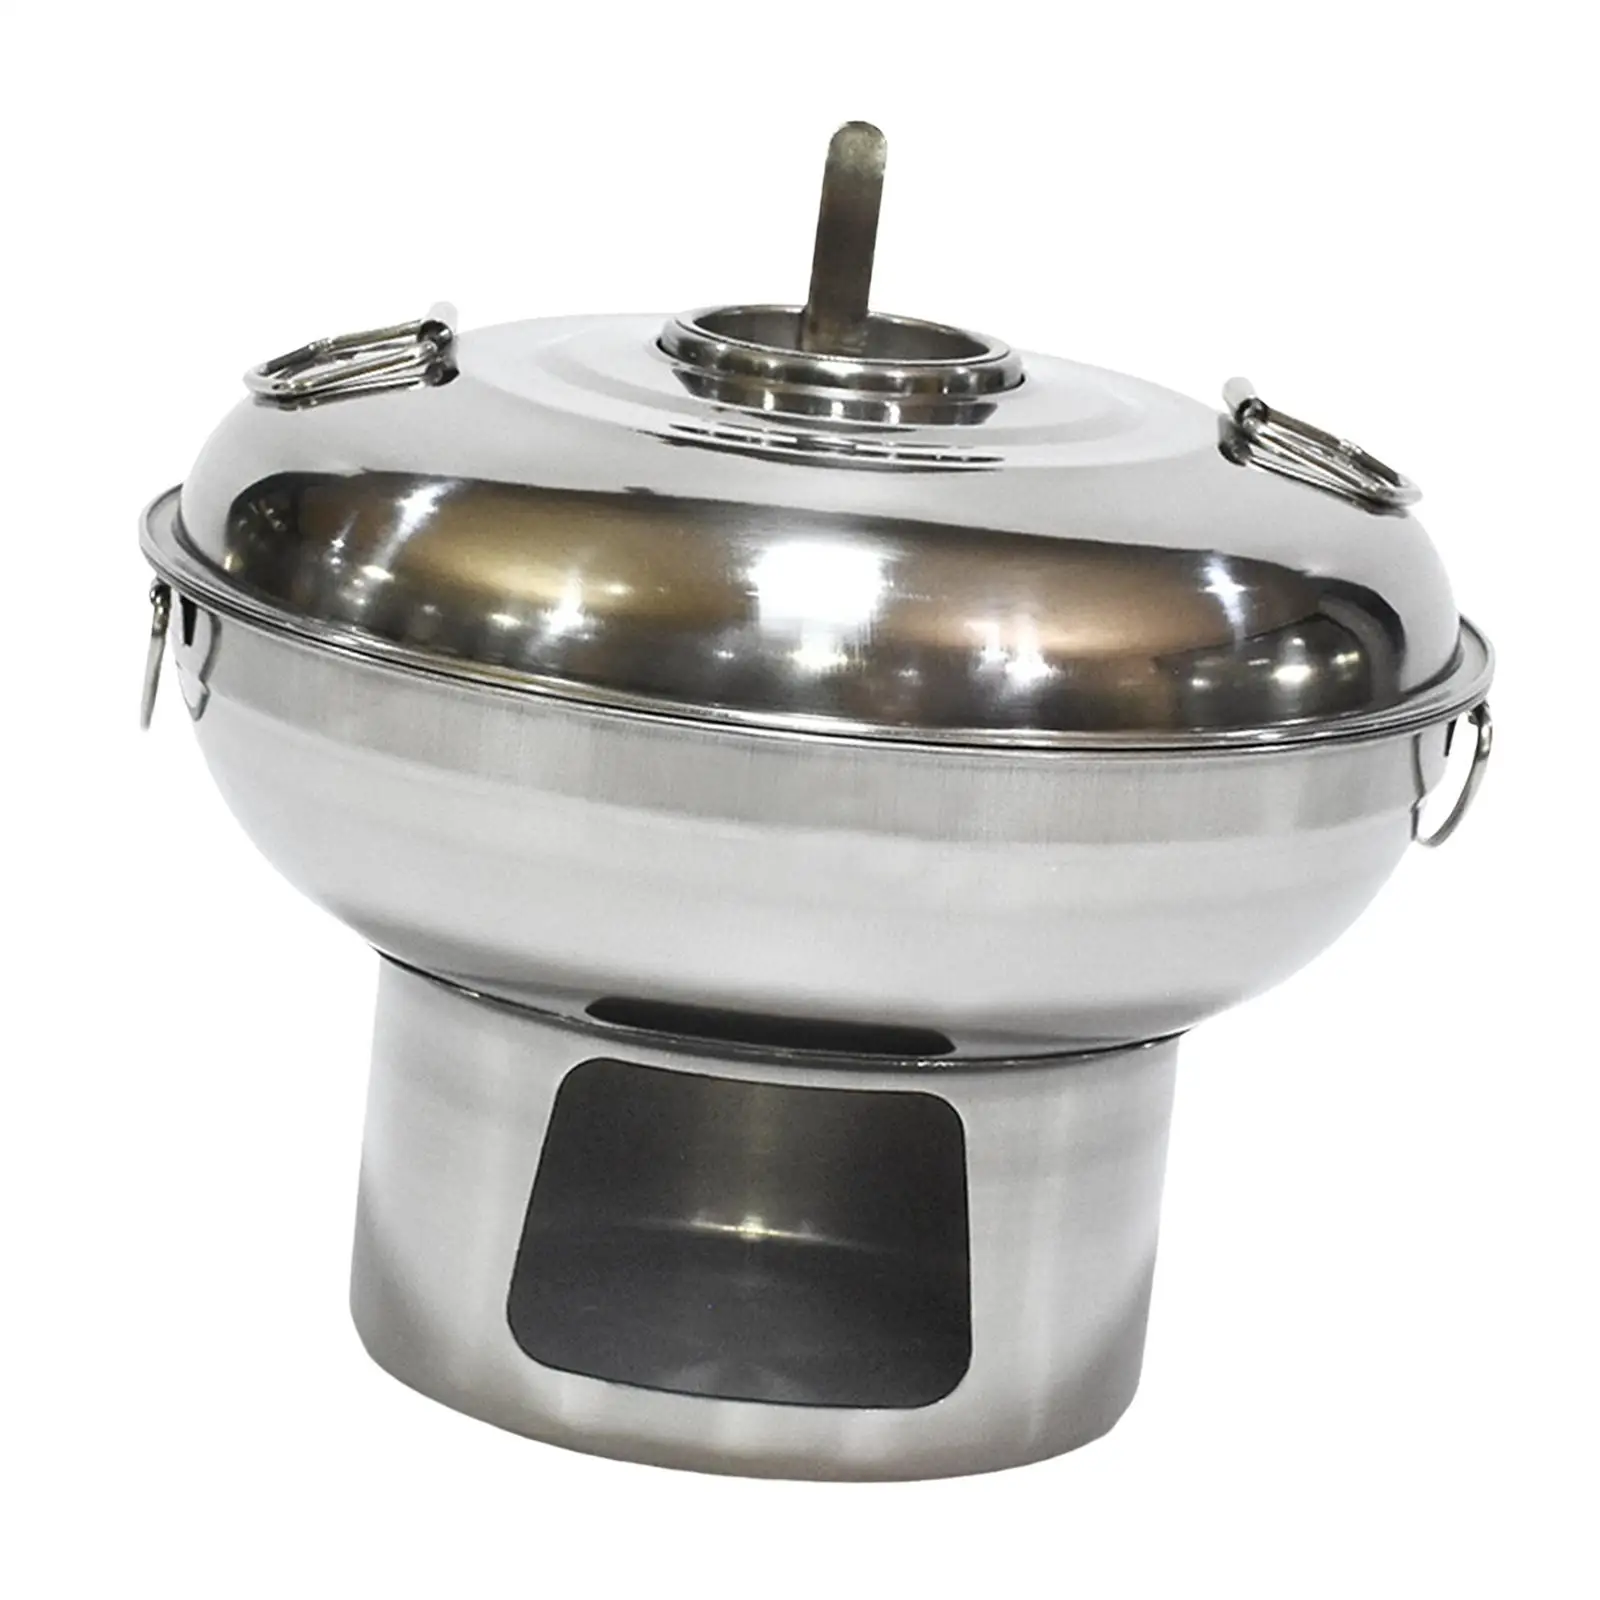 Small Hot Pot Single Person Small Hotpot Stockpot Milk Tea Hot Outdoor Cooker Traditional Chinese Hot Pot for Picnic